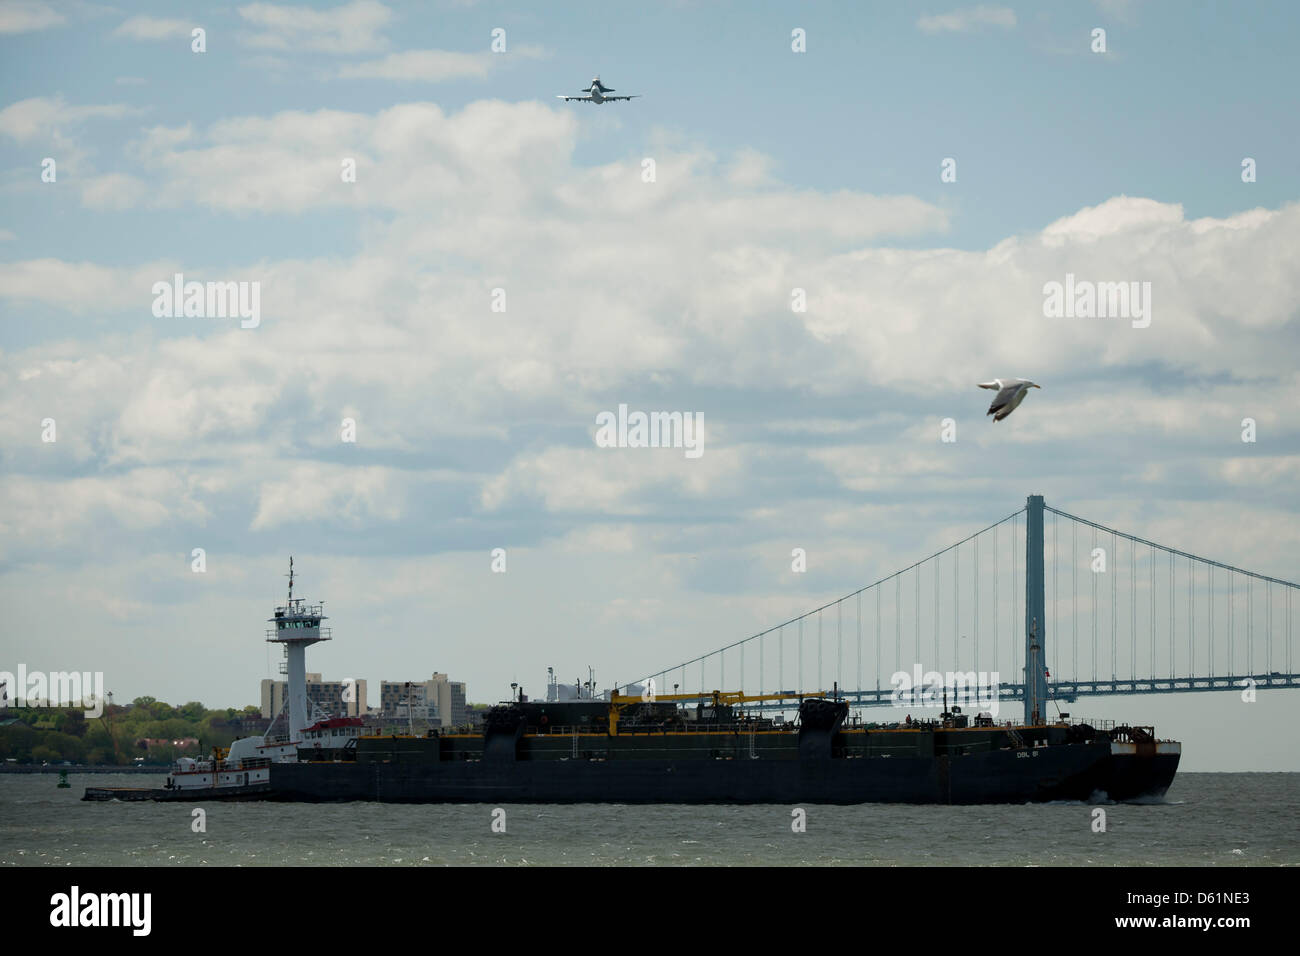 Space shuttle Enterprise, mounted atop a NASA 747 Shuttle Carrier Aircraft (SCA), is seen as it flies over the Verrazano Bridge, Friday, April 27, 2012, in New York. Enterprise was the first shuttle orbiter built for NASA performing test flights in the atmosphere and was incapable of spaceflight. Originally housed at the Smithsonian's Steven F. Udvar-Hazy Center, Enterprise will be Stock Photo